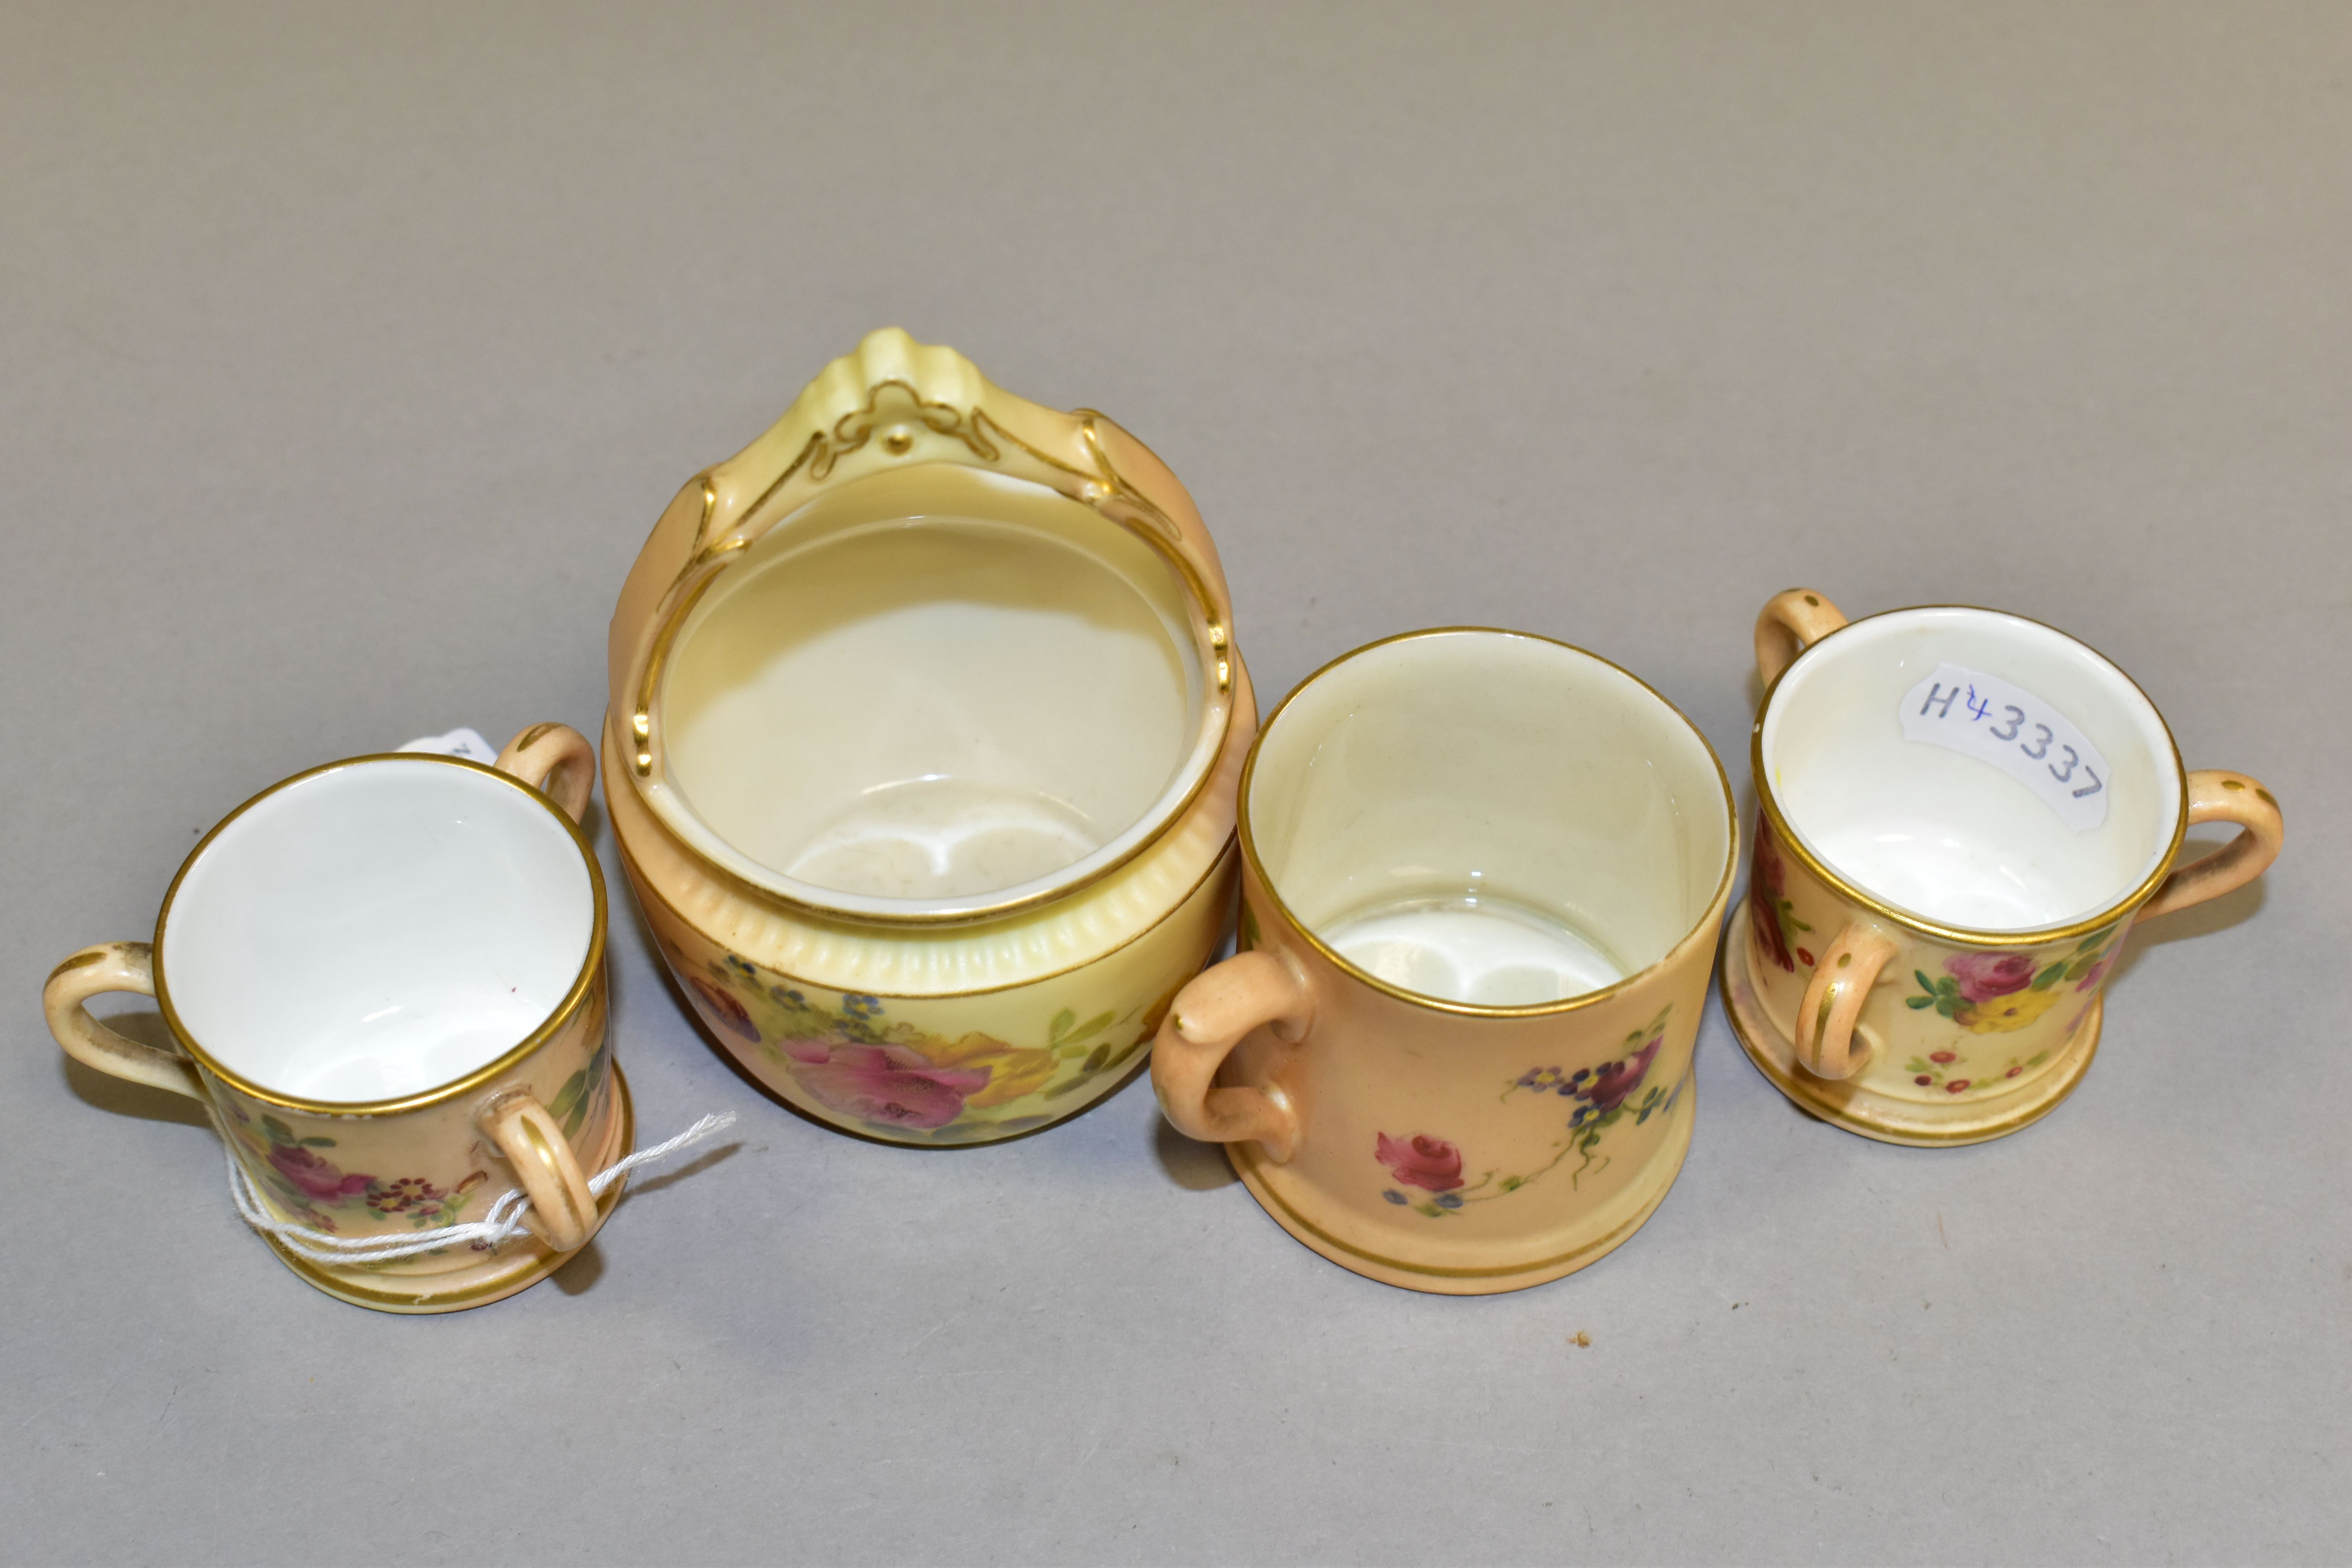 FOUR PIECES OF ROYAL WORCESTER BLUSH IVORY WARES, each printed and tinted with flowers, with green - Image 3 of 4